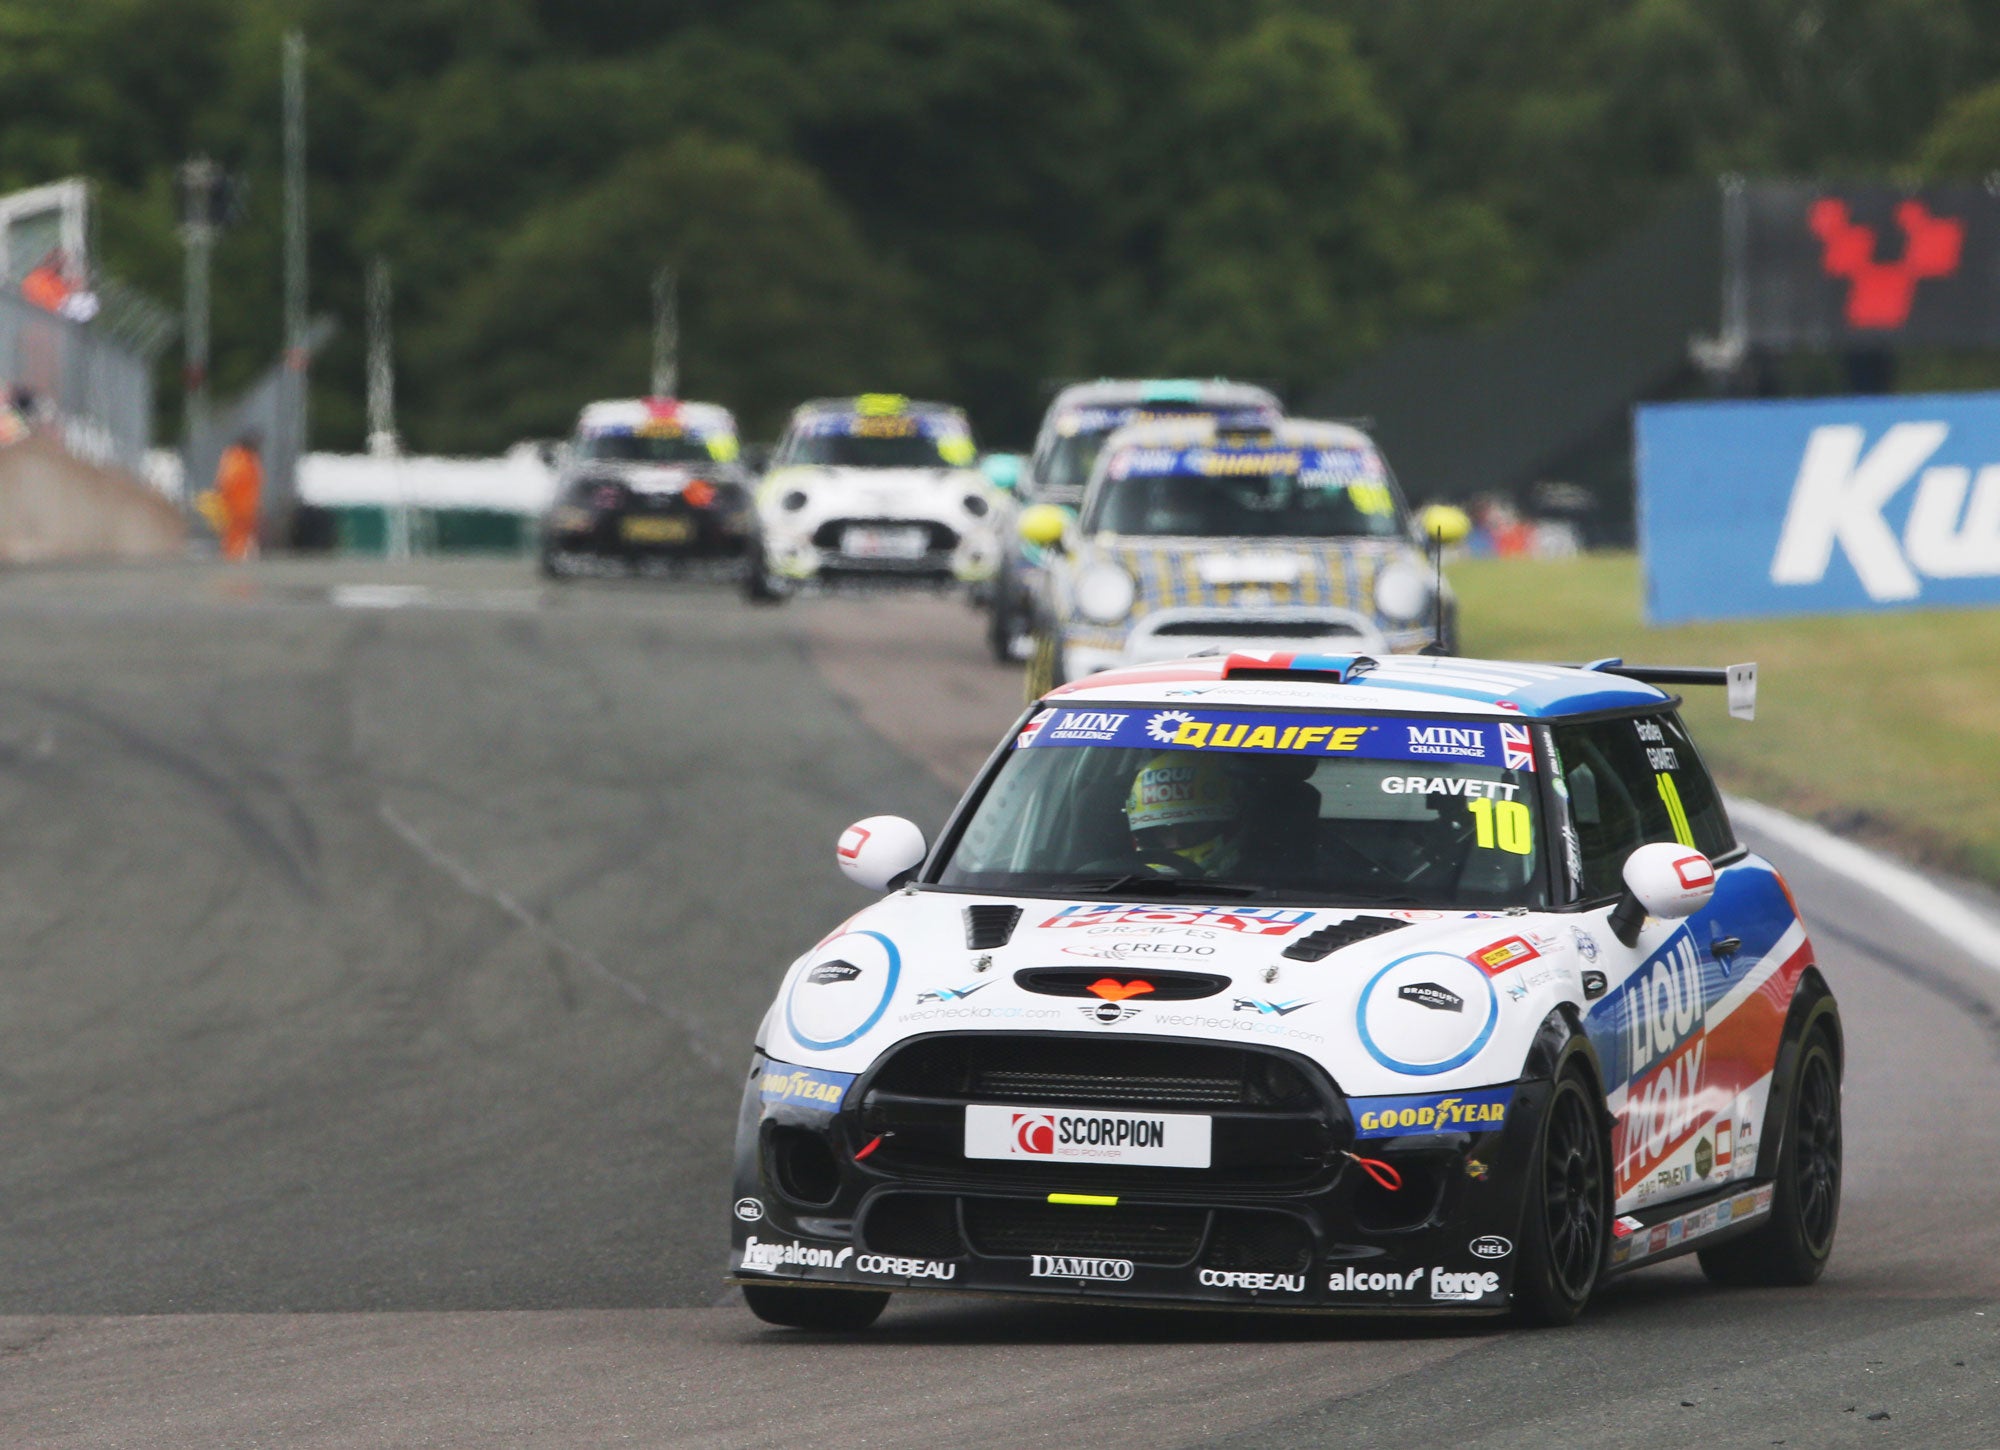 Bradley Gravett son of BTCC British Touring Car Champion Robb Gravett in the MINI Challenge JCW Series at Oulton Park in 2021 at Old Hall Turn 1 Graves Motorsport Cooper Racing Driver LIQUI MOLY LM Performance Thinking it Better